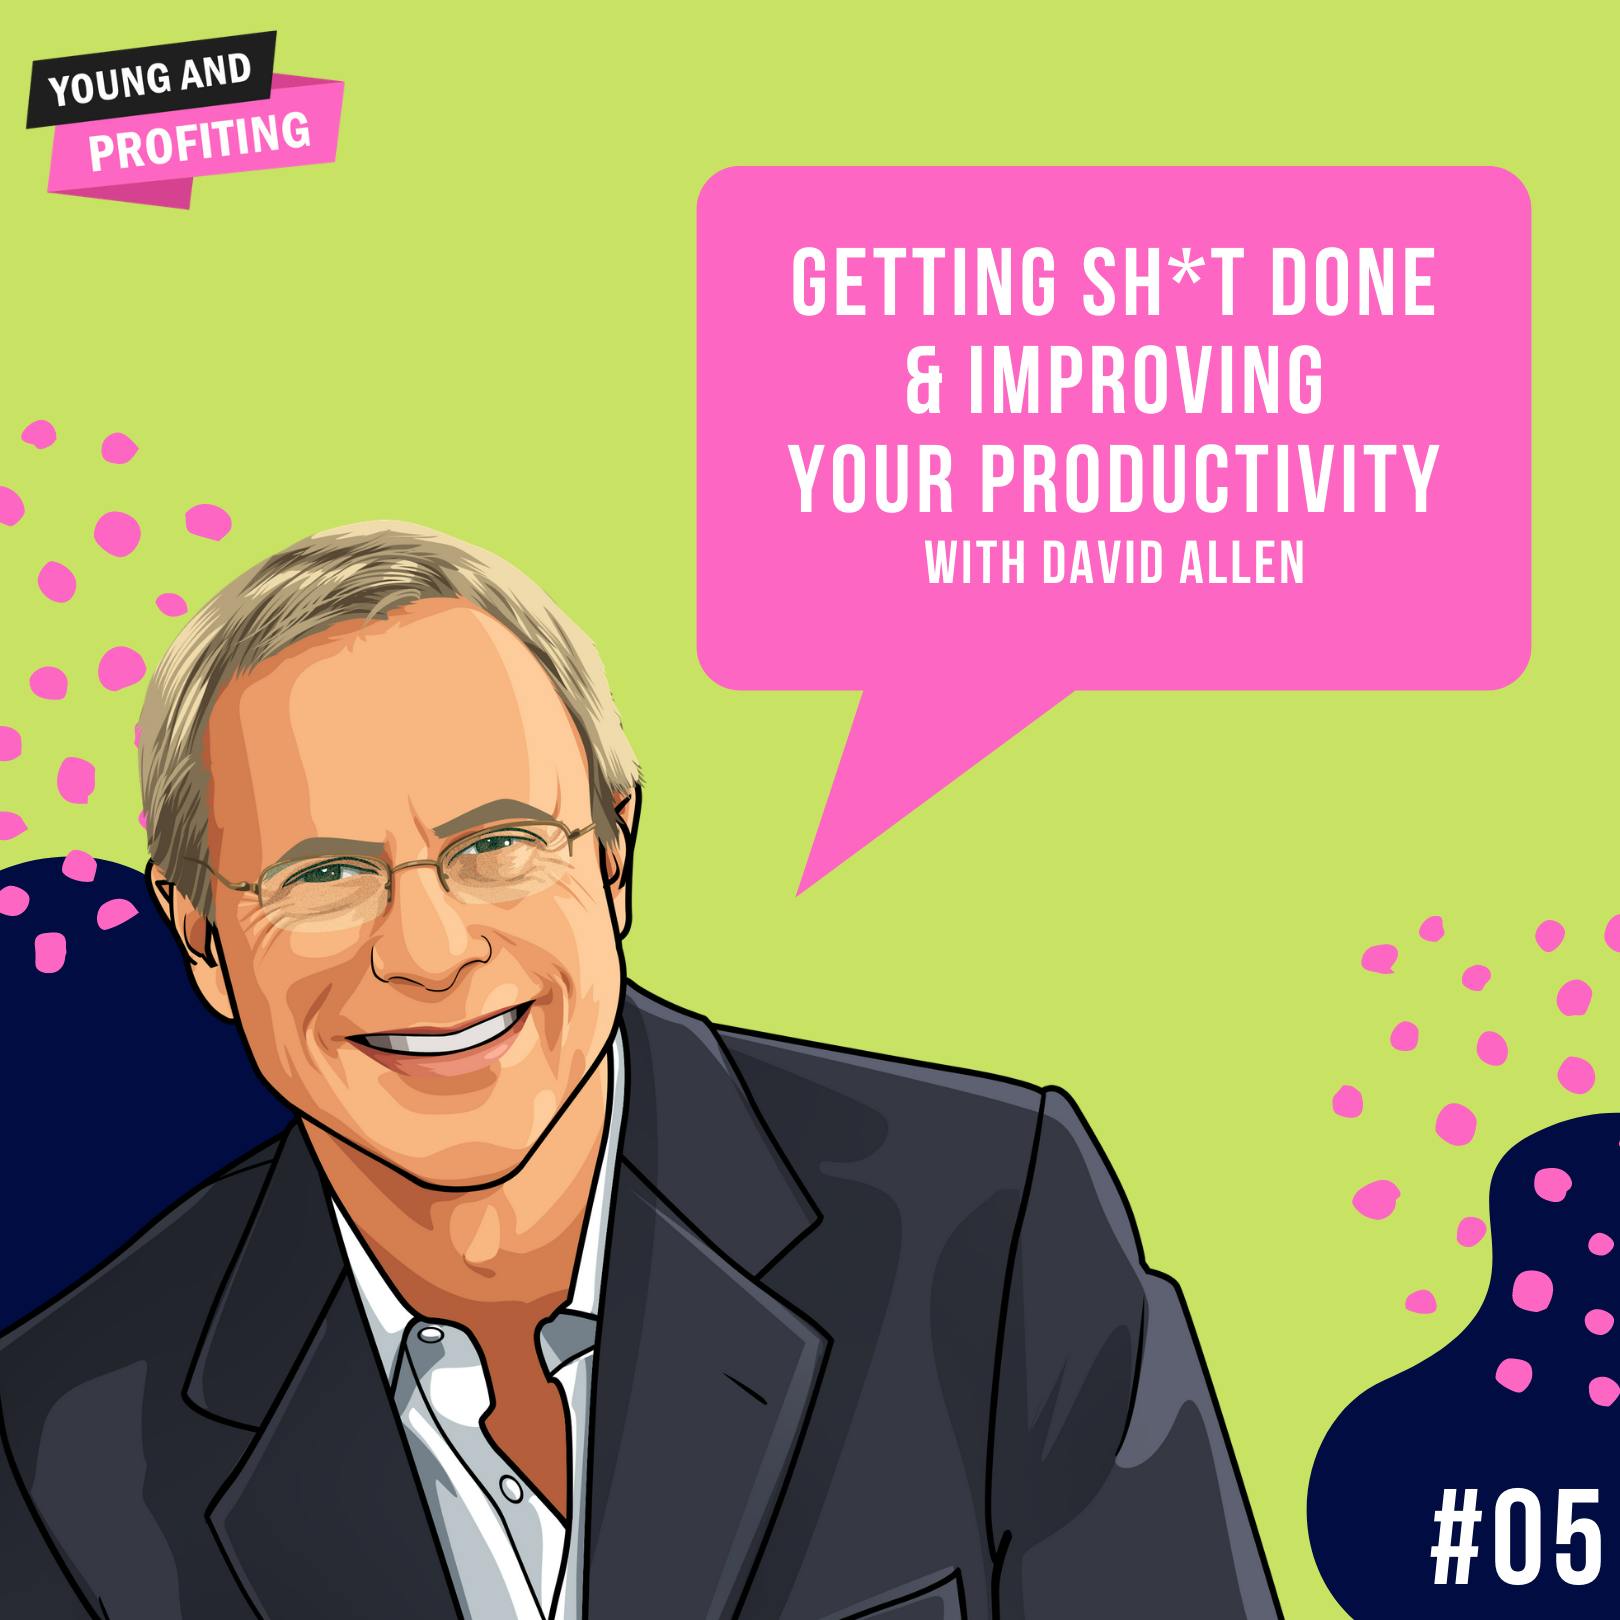 David Allen: Getting Sh*t Done & Improving Your Productivity | E5 by Hala Taha | YAP Media Network